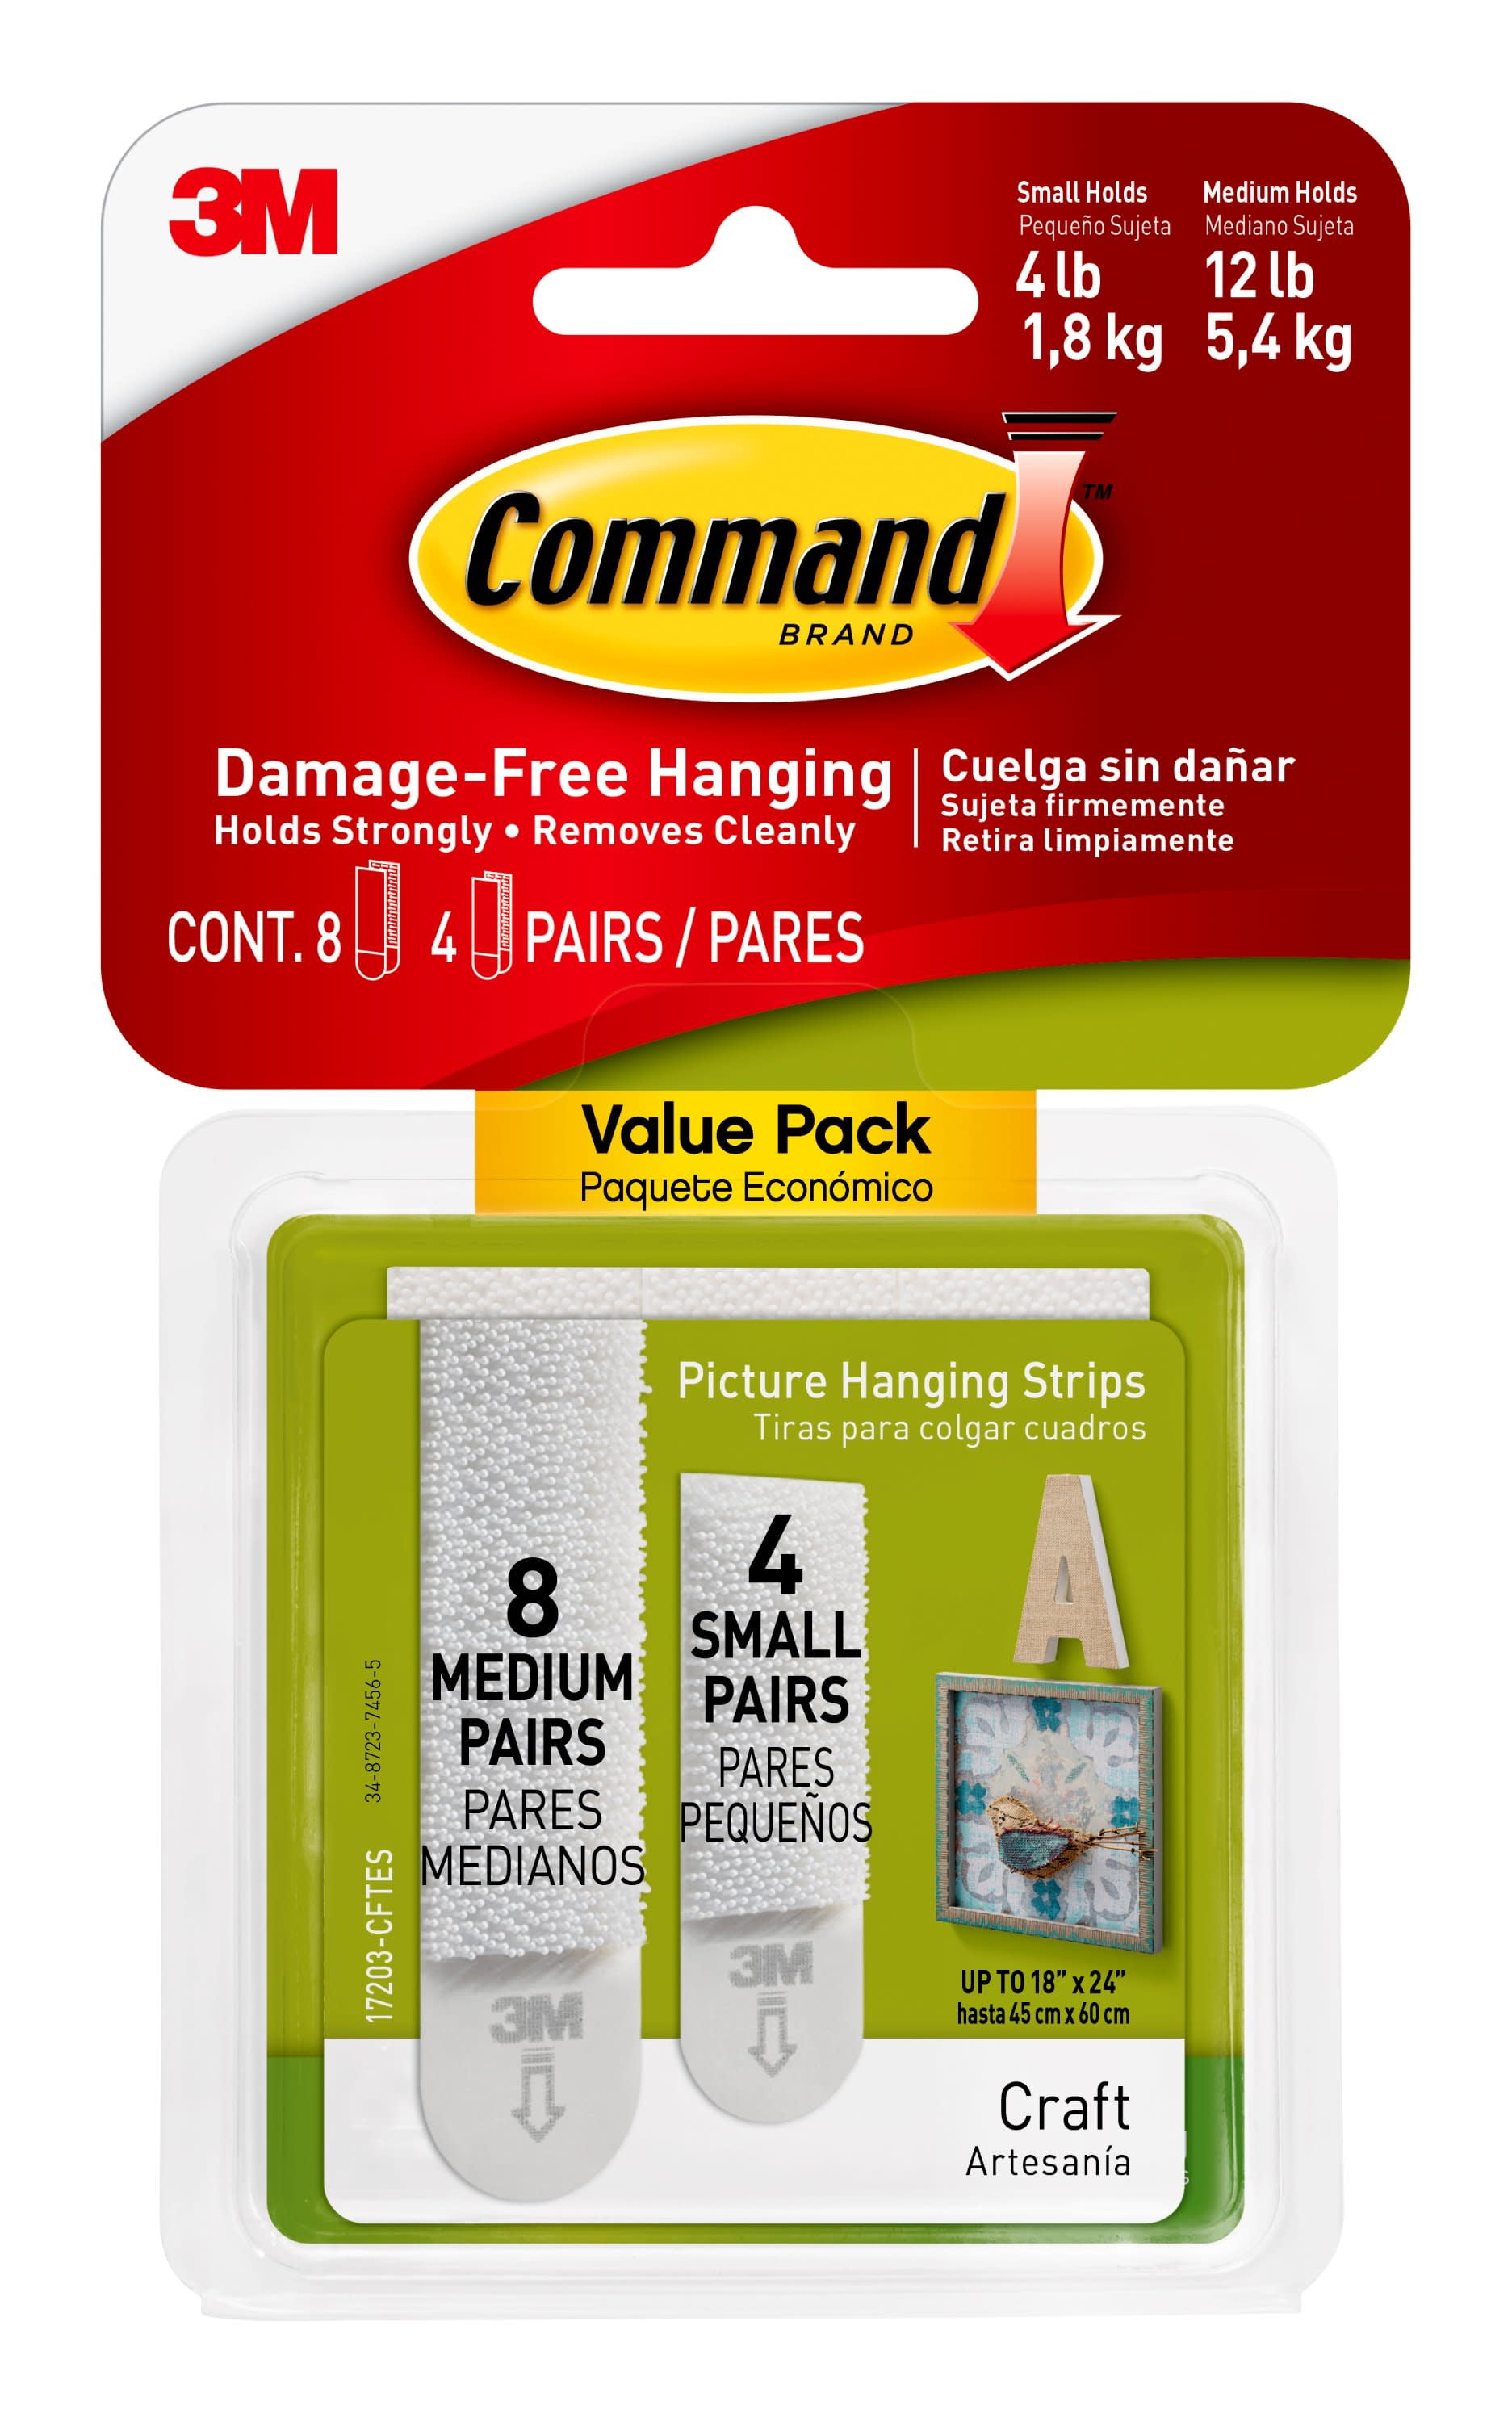 Command CMND 4-CT PICTURE HANGING STRPS at